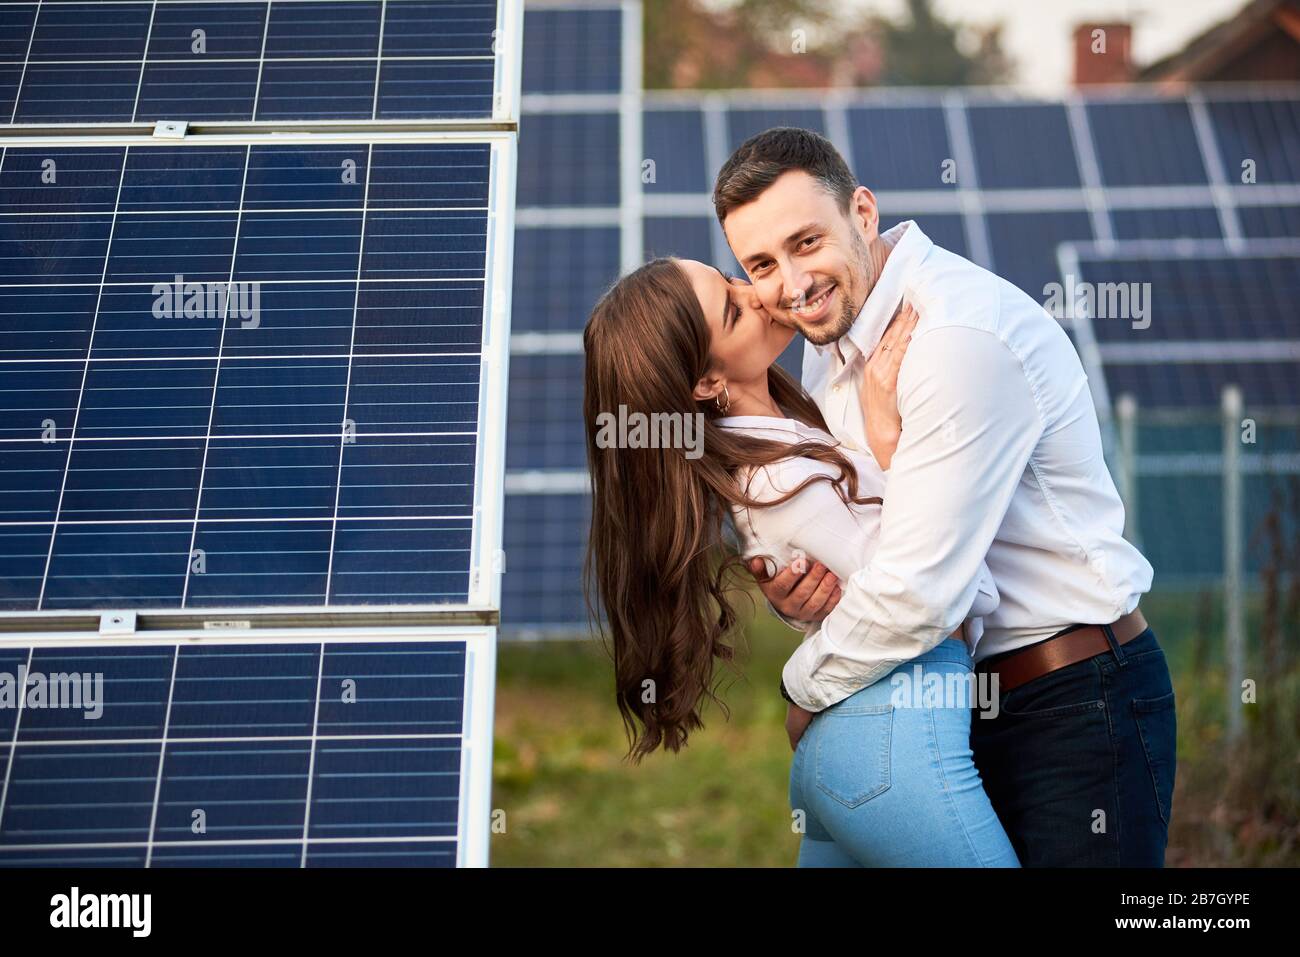 Happy pair are hugging against the background of a row of solar panels at a site near the house. Girl with long hair kisses a guy. Slender people in jeans and white shirts. Solar energy concept image Stock Photo